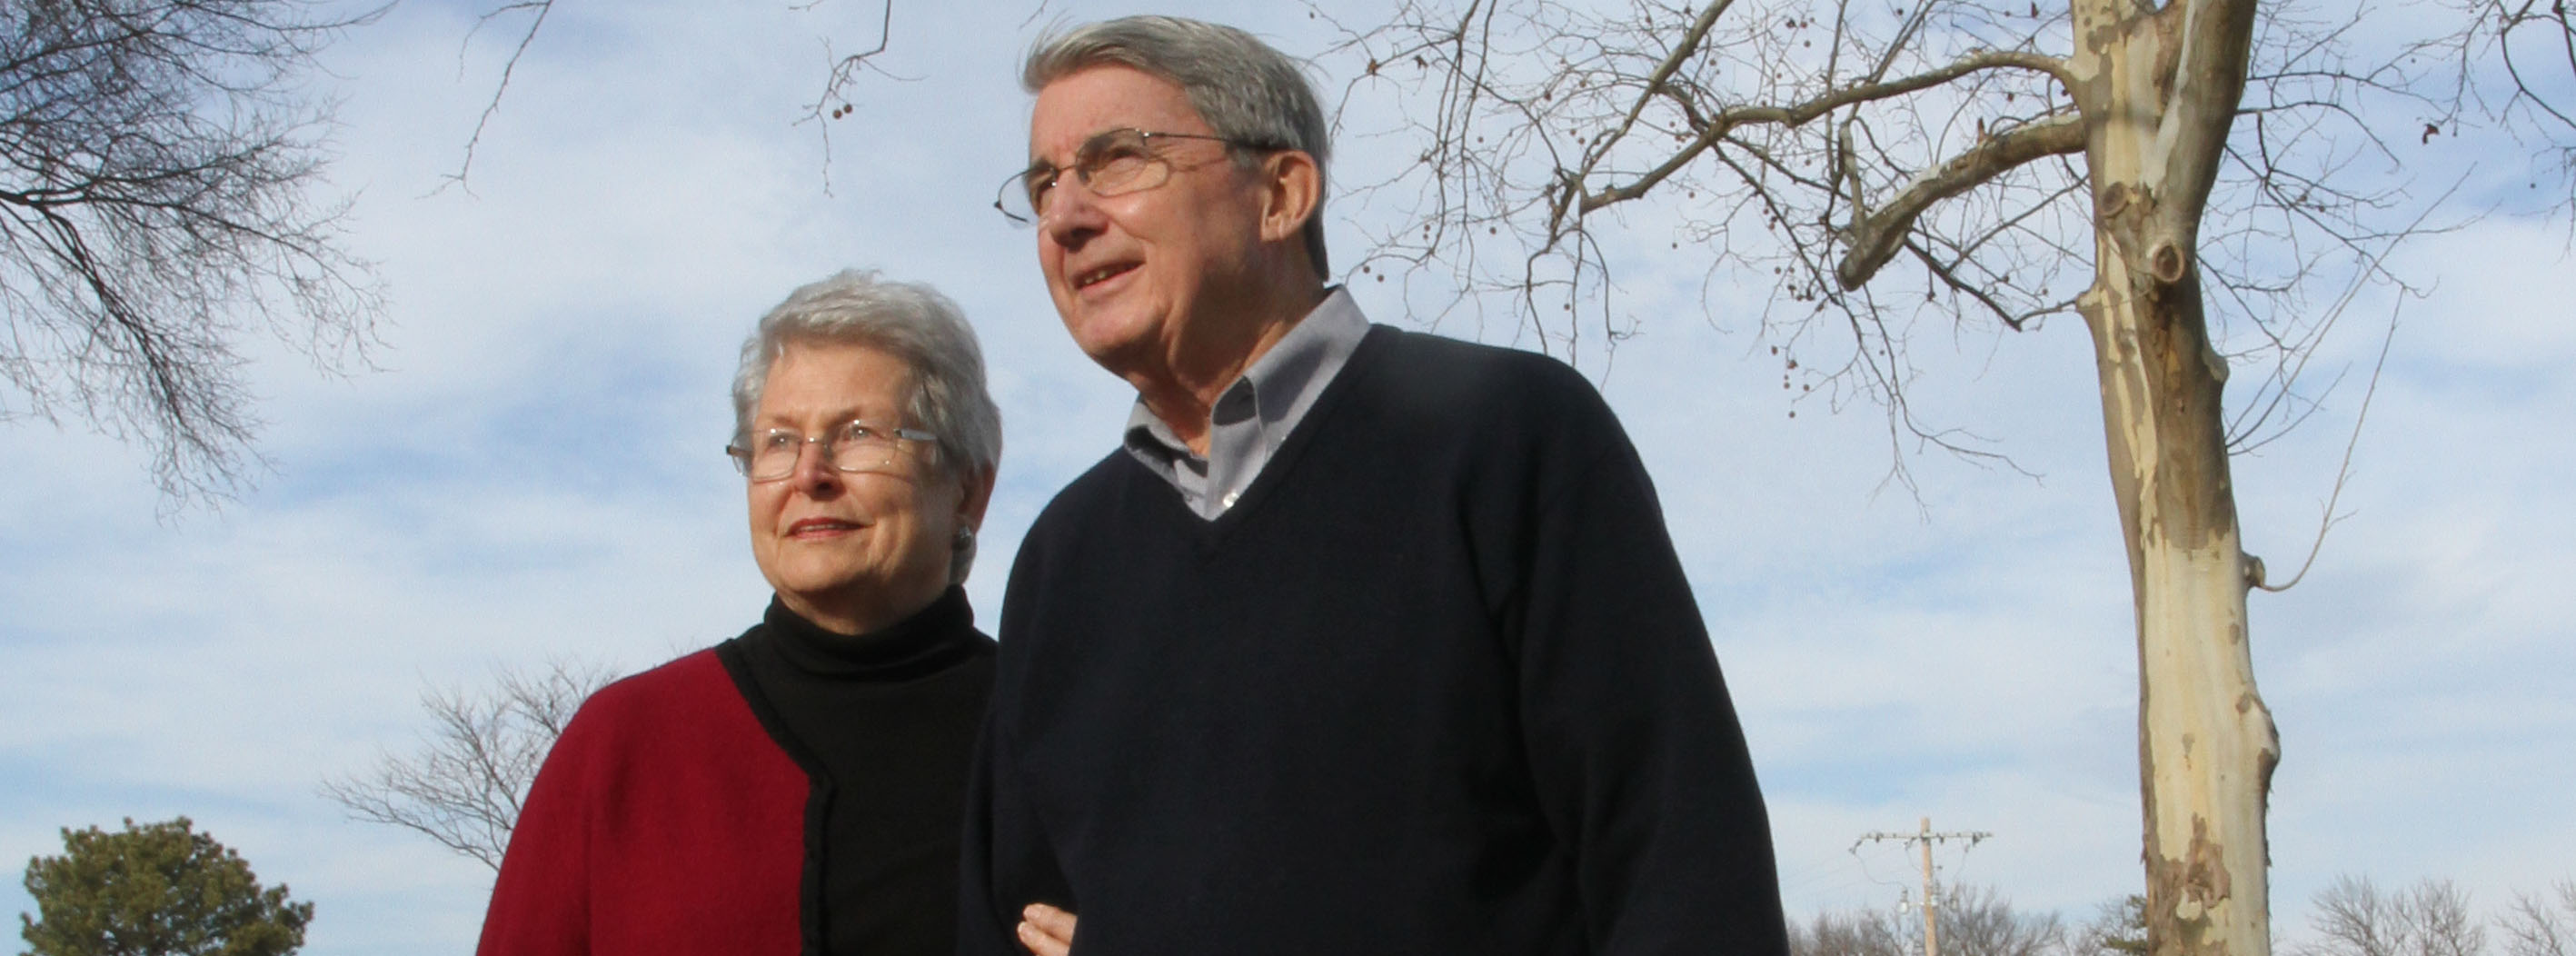 Ben and Sue Sprunger kept harmony in the family tree with estate planning